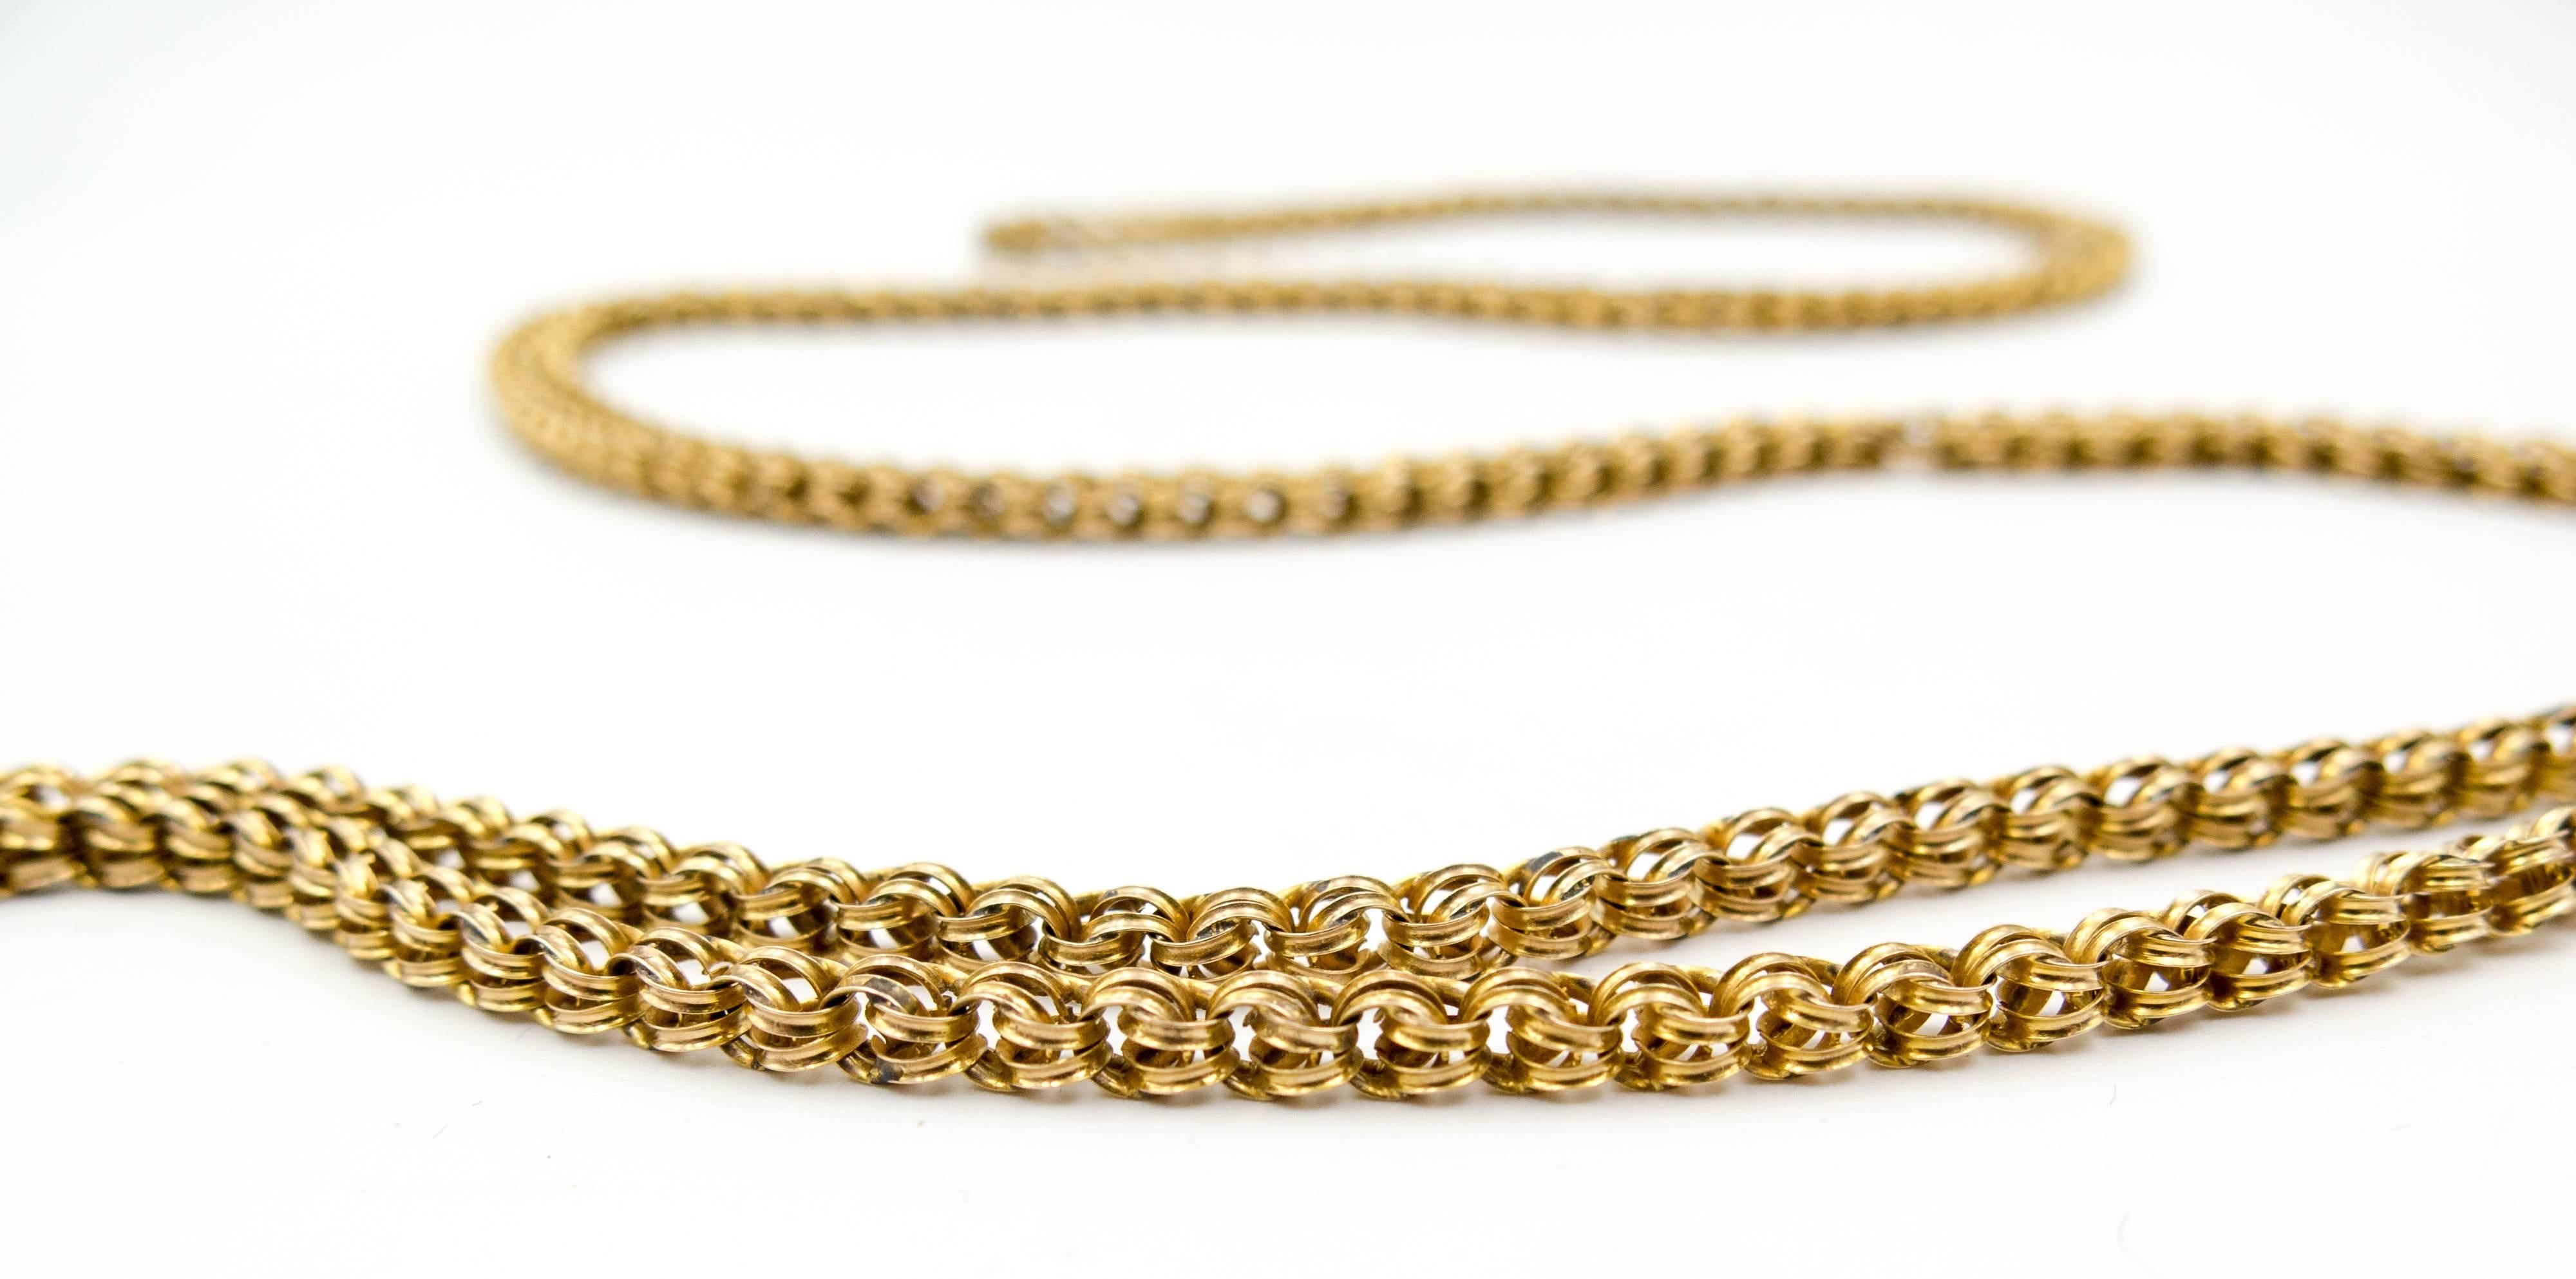 We love these chains because they're so wearable and versatile:  beautifully worked small links with an elegant patina interlocking into a chain measuring 60